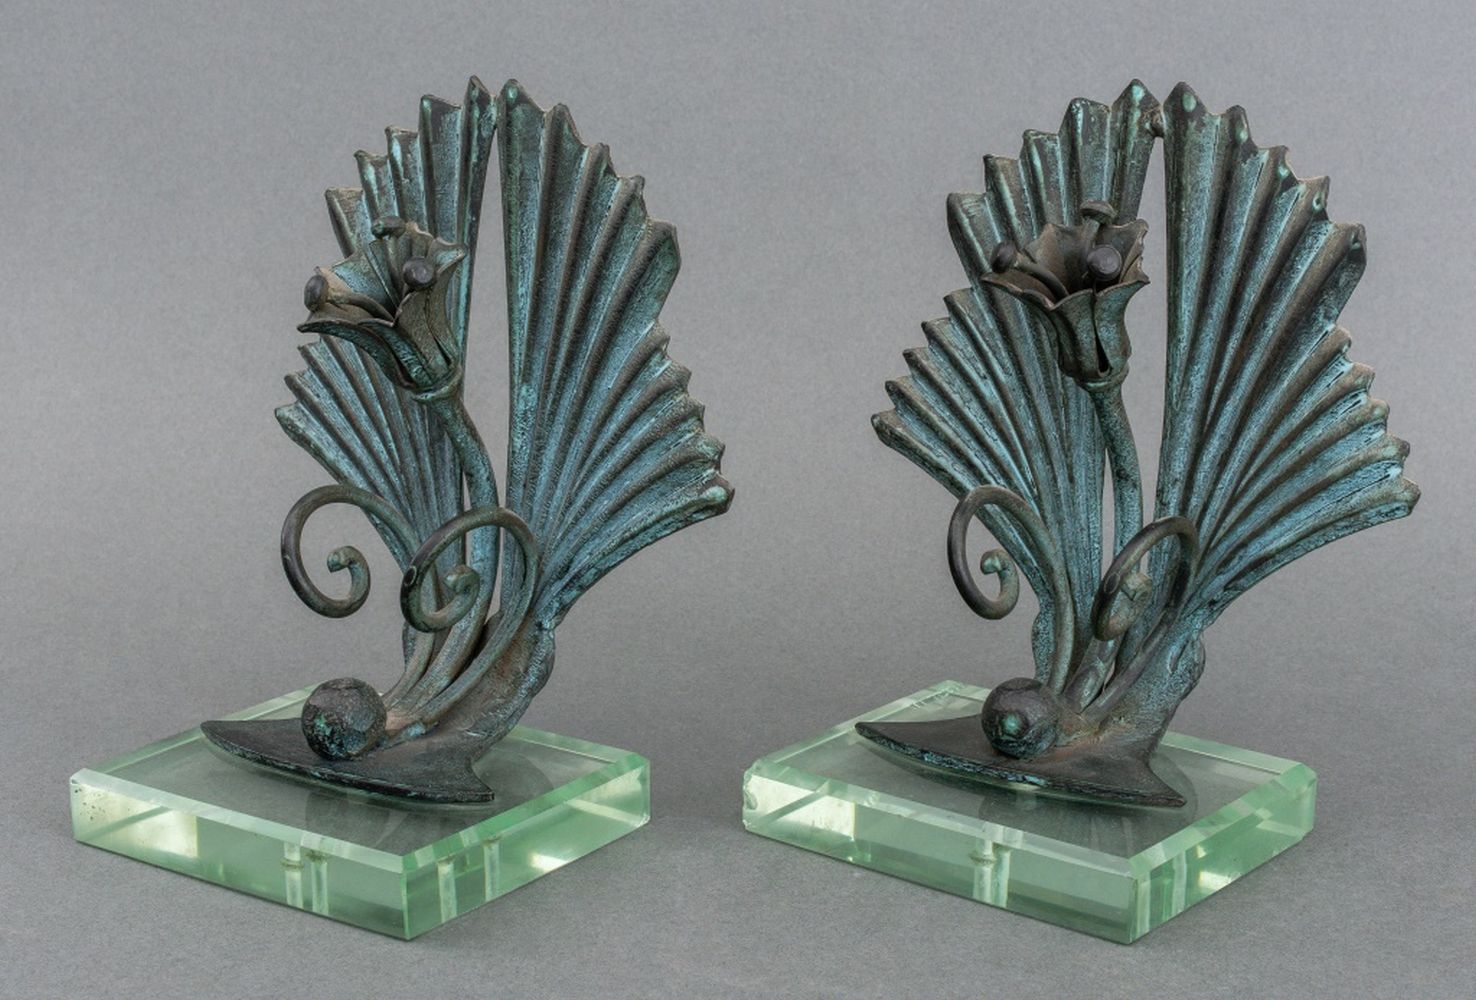 FLOWER IRON GLASS BOOKENDS PAIR 2fc0f5